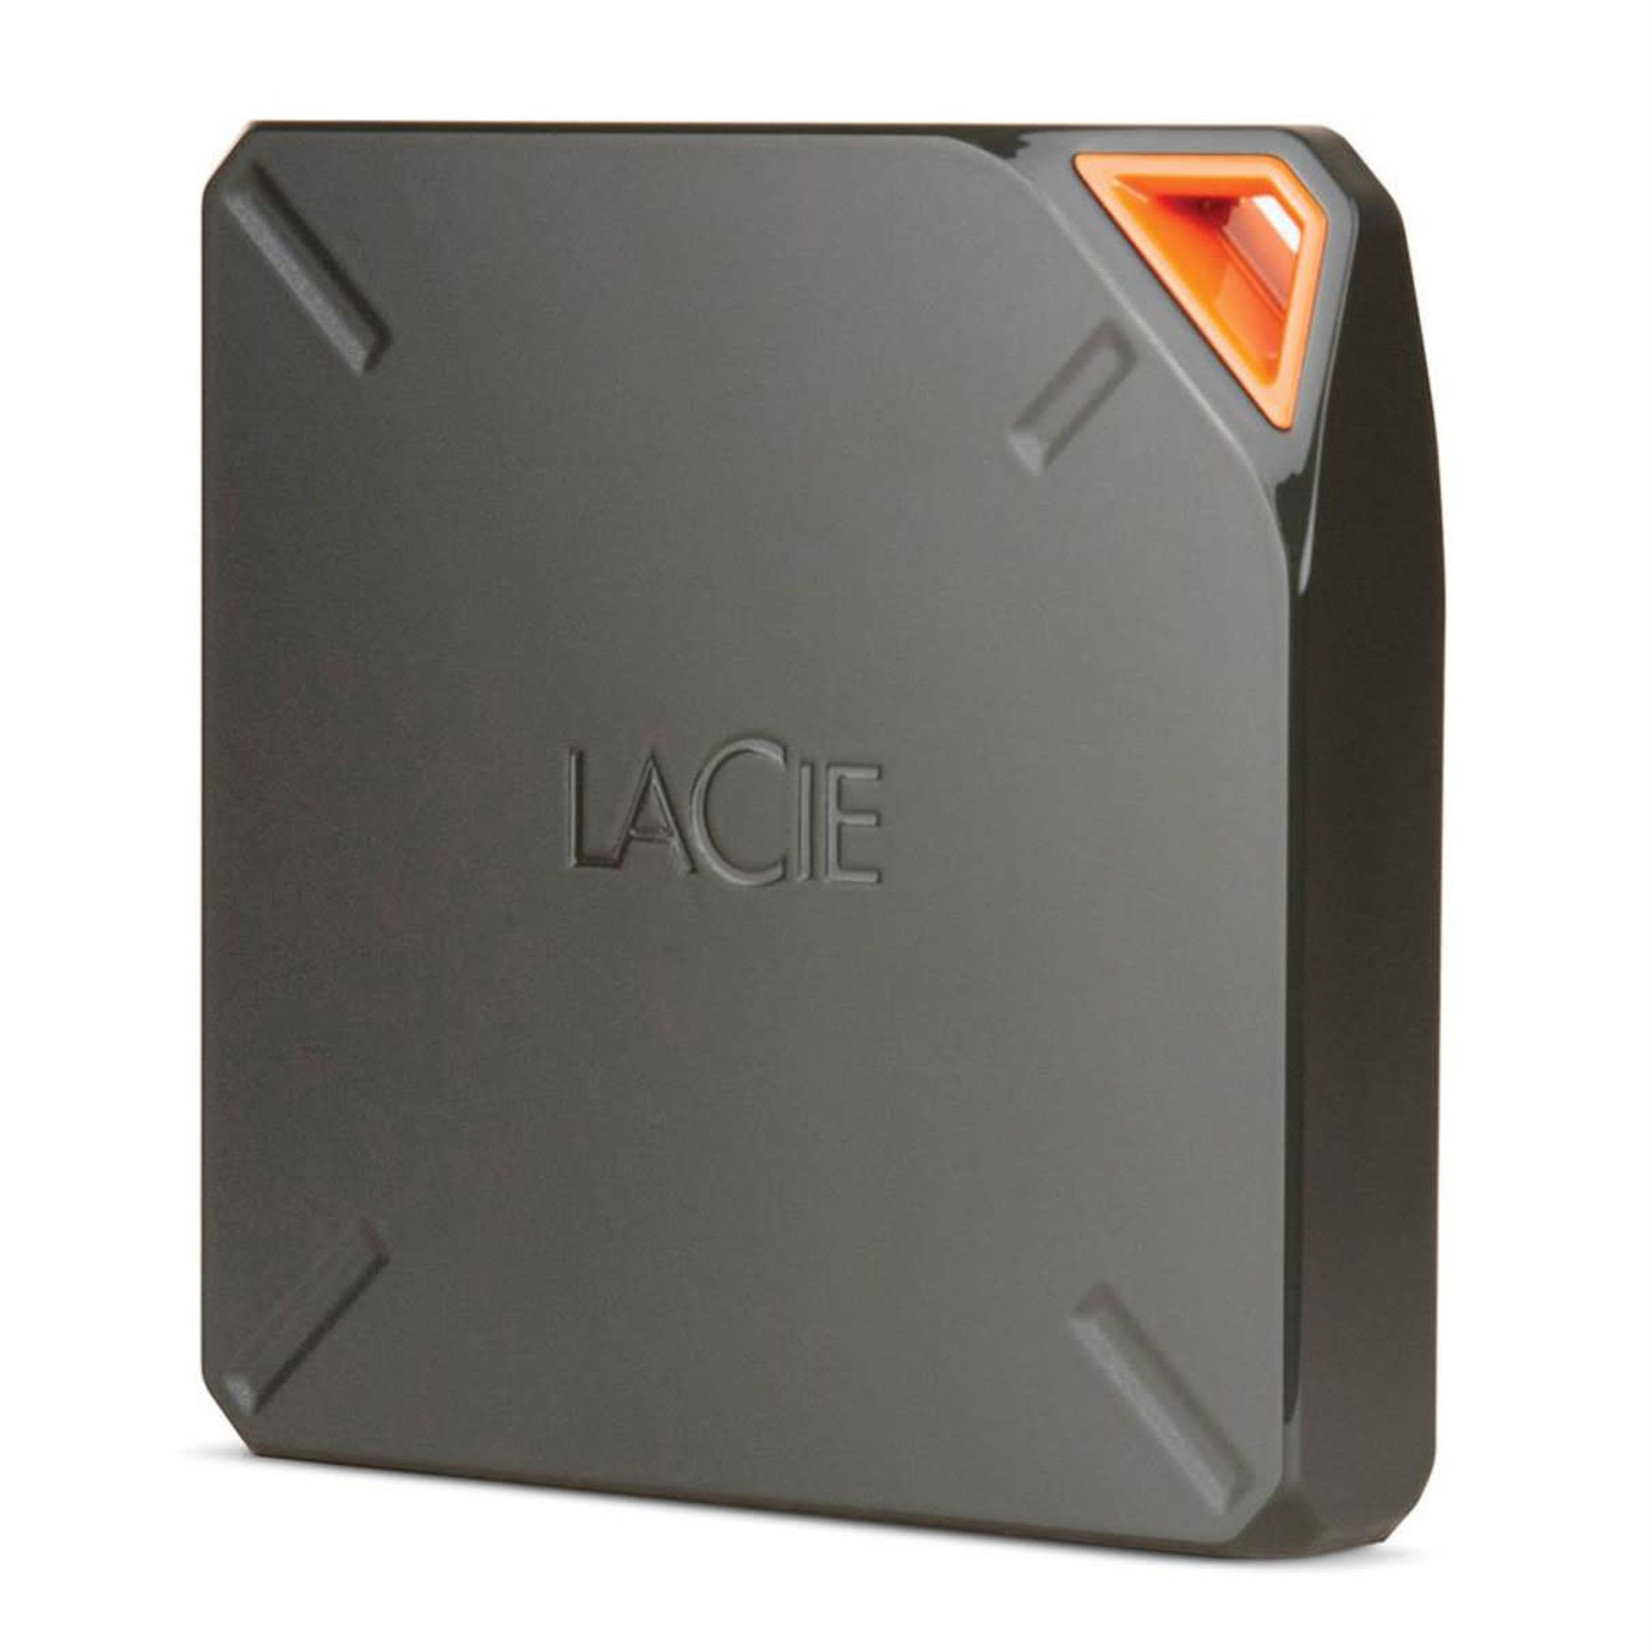 LaCie LaCie Wireless 1TB Battery Powered Mobile HD FUEL